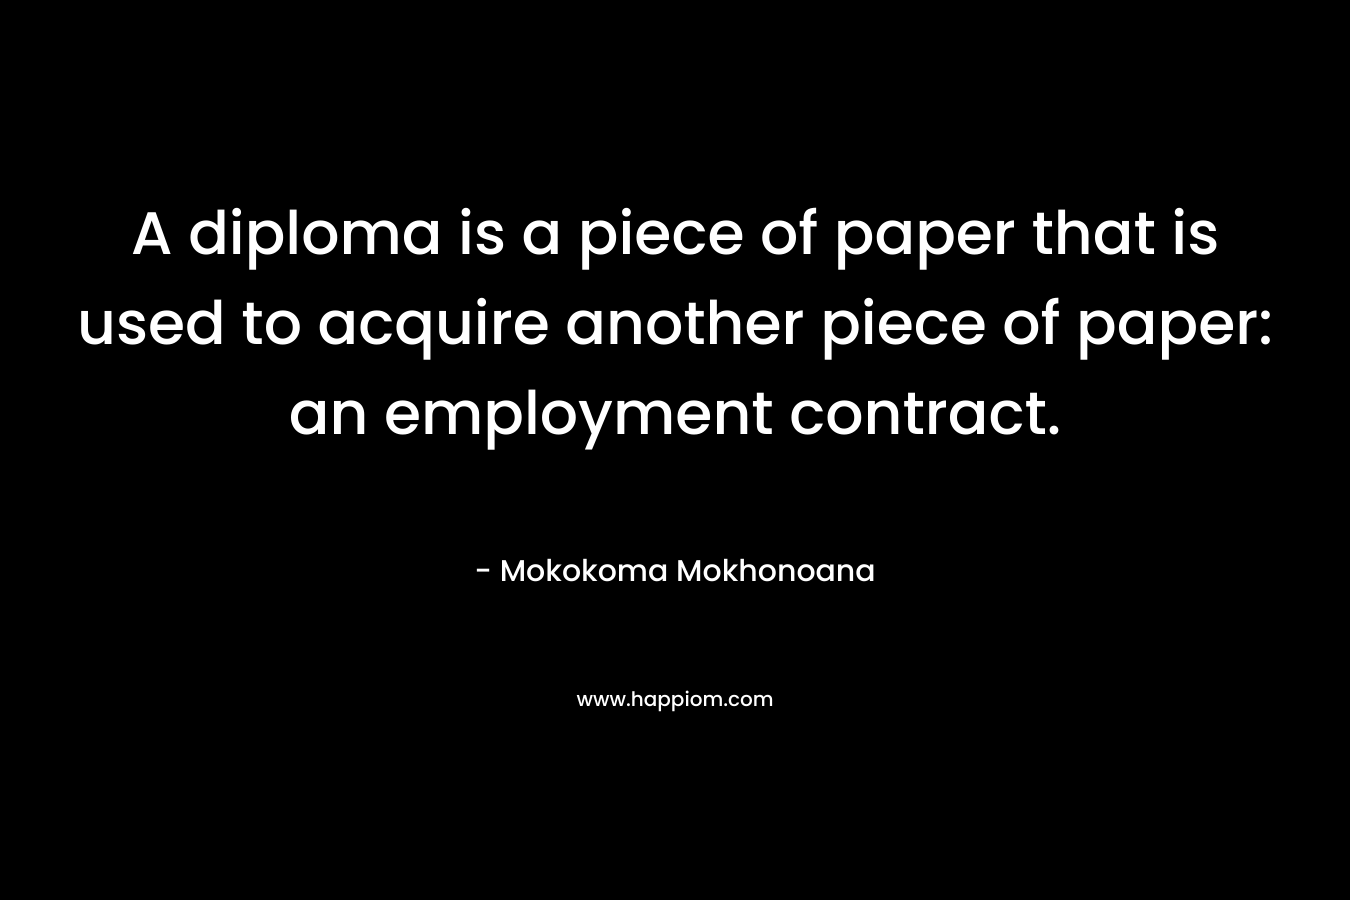 A diploma is a piece of paper that is used to acquire another piece of paper: an employment contract.